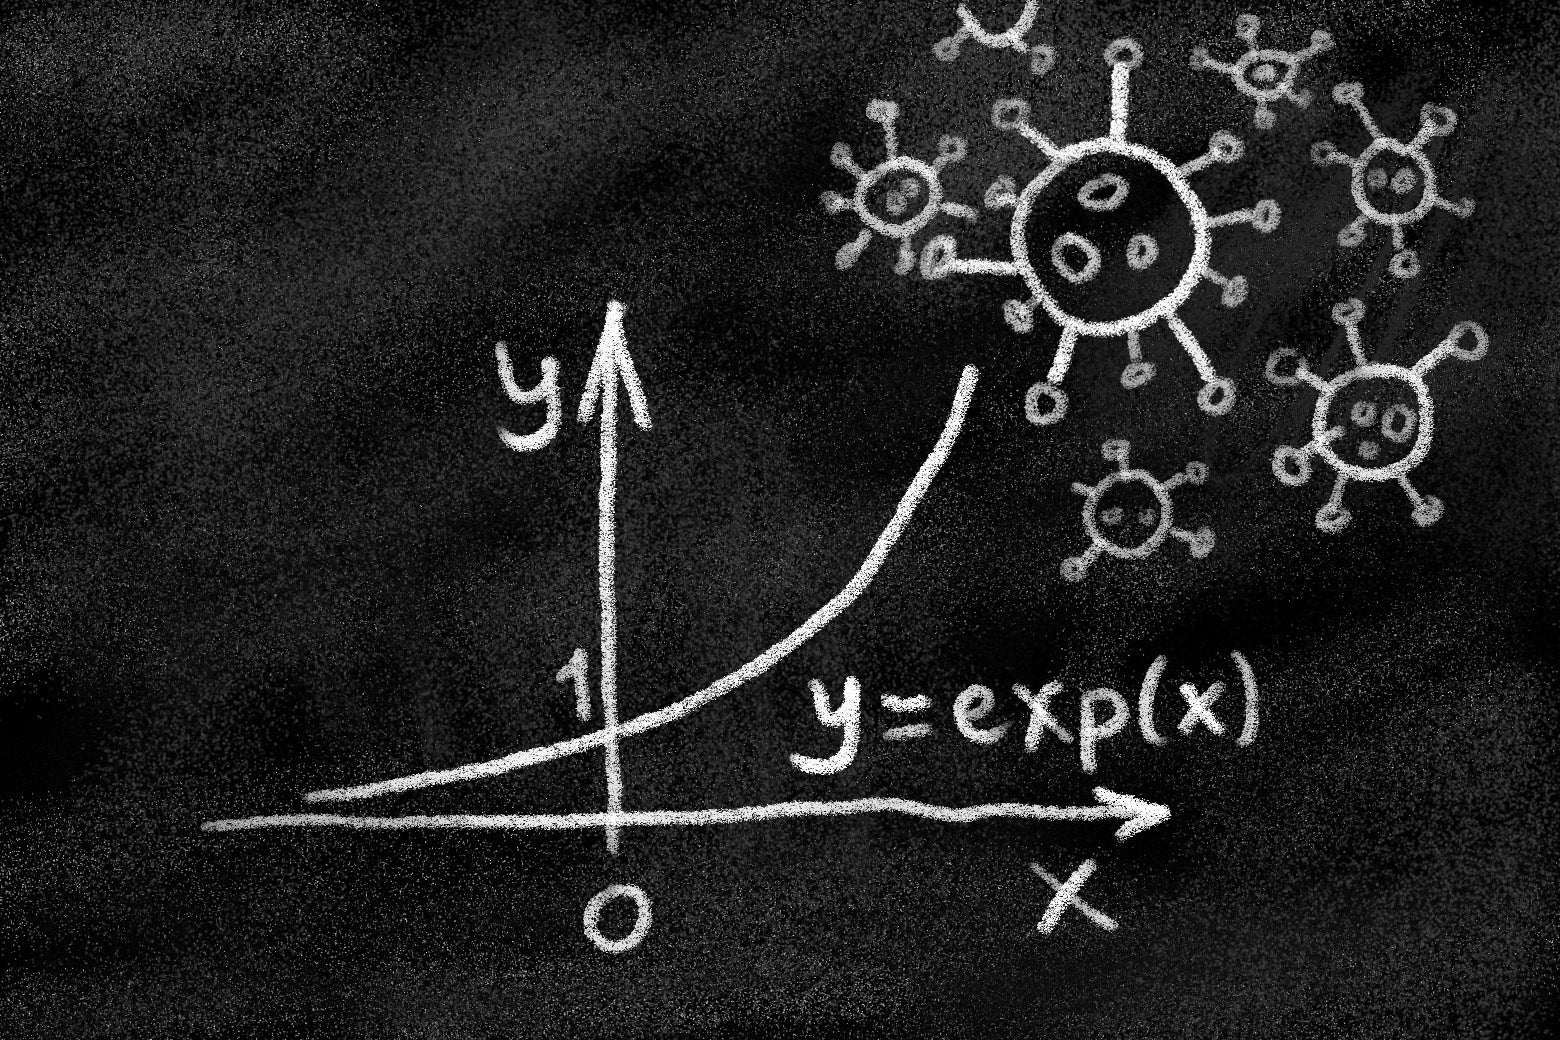 A chalkboard drawing of an exponential growth with some coronavirus molecules up and to the right.